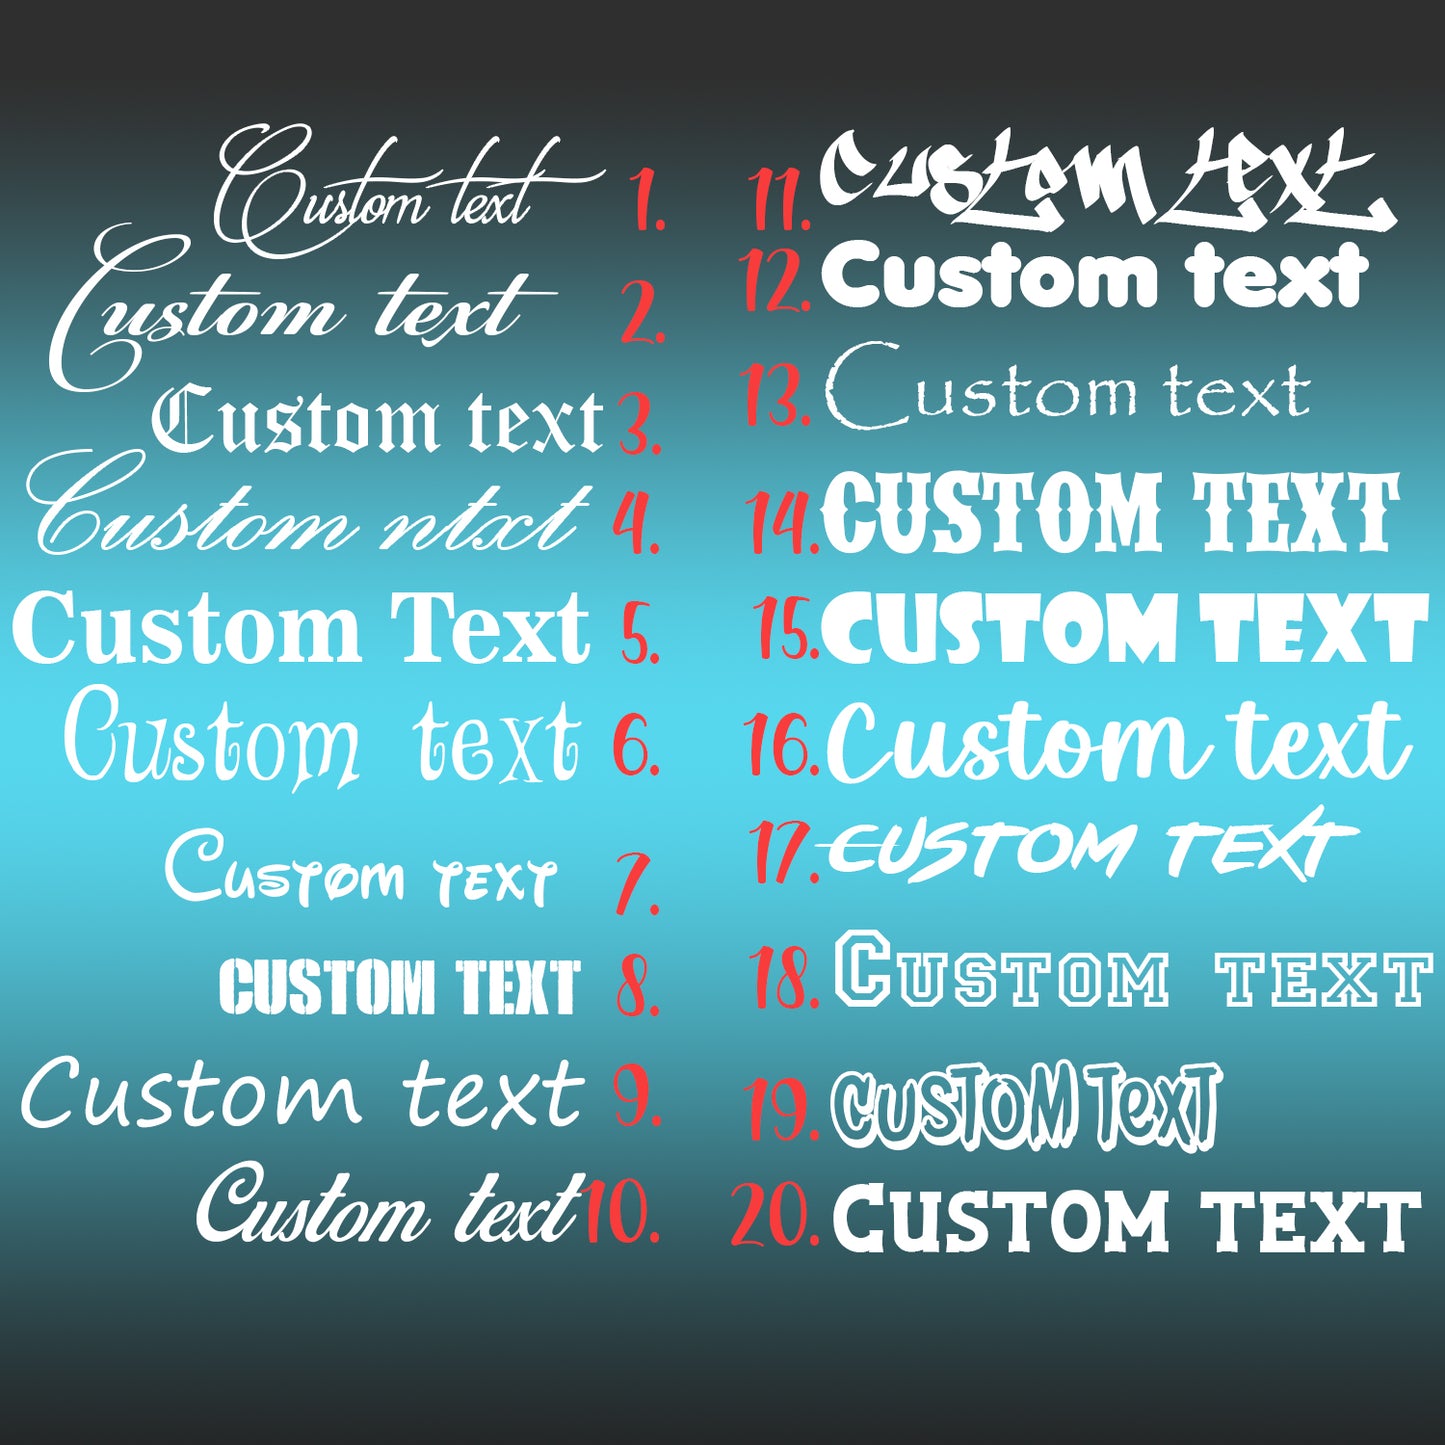 Personalized Stickers For Your Boat - Custom Text Decal With Your Own Design - Vinyl Lettering Sticker